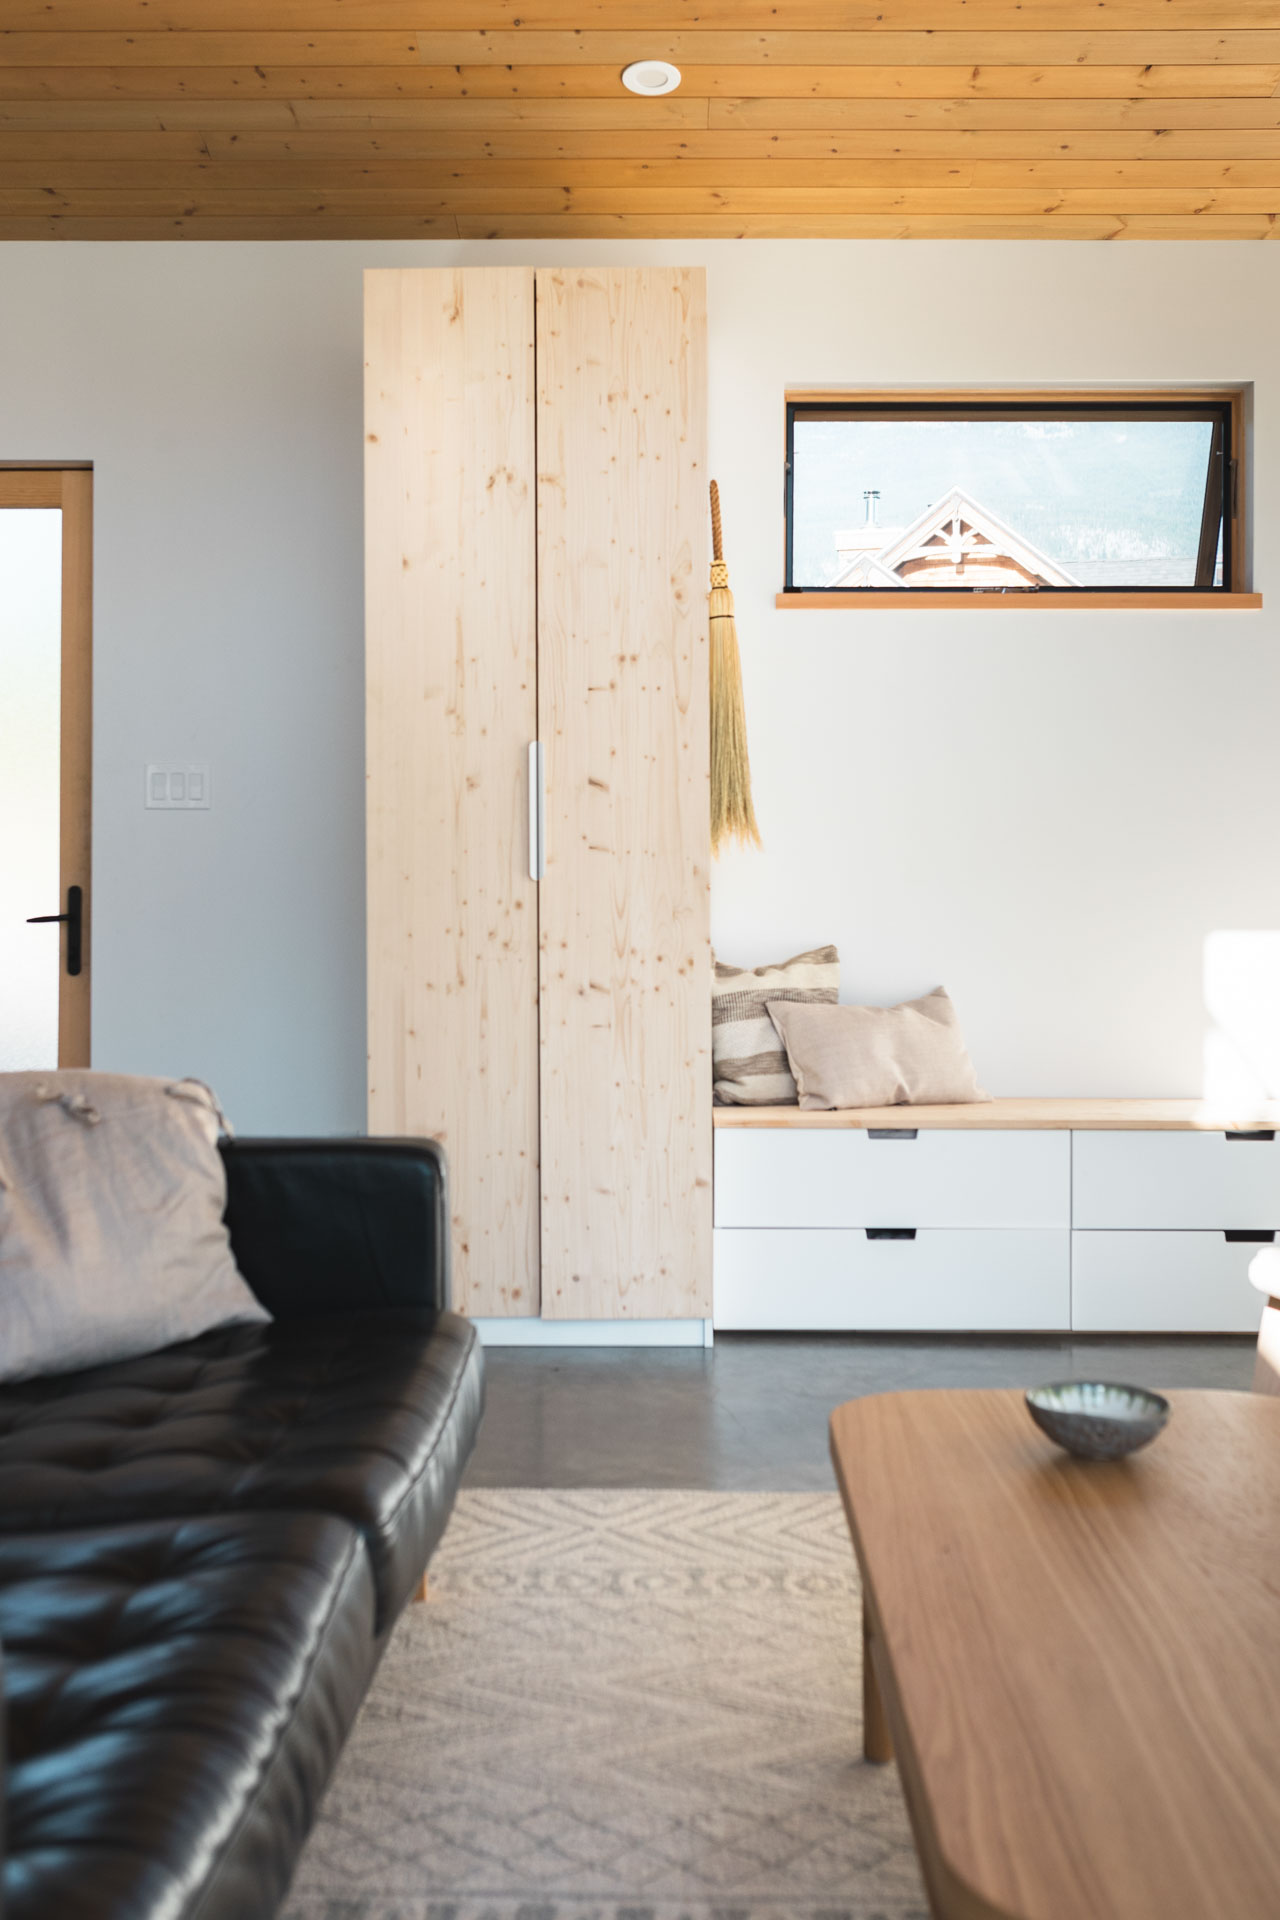 Minimalist wood and white interior of a custom home built by Eisenhauer Woodworks in Kaslo, BC